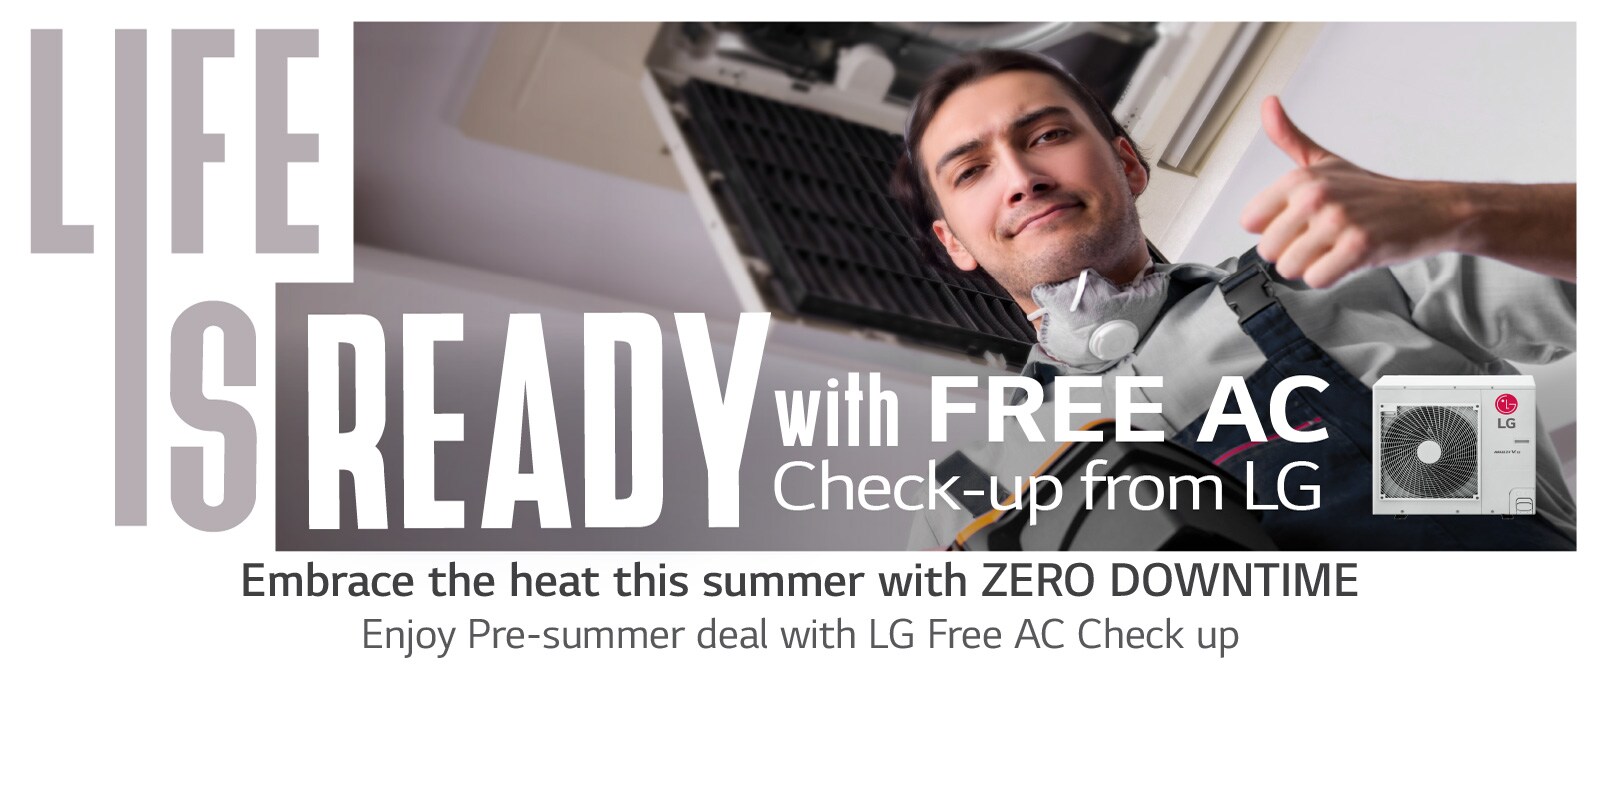 Embrace the heat this summer with ZERO DOWNTIME